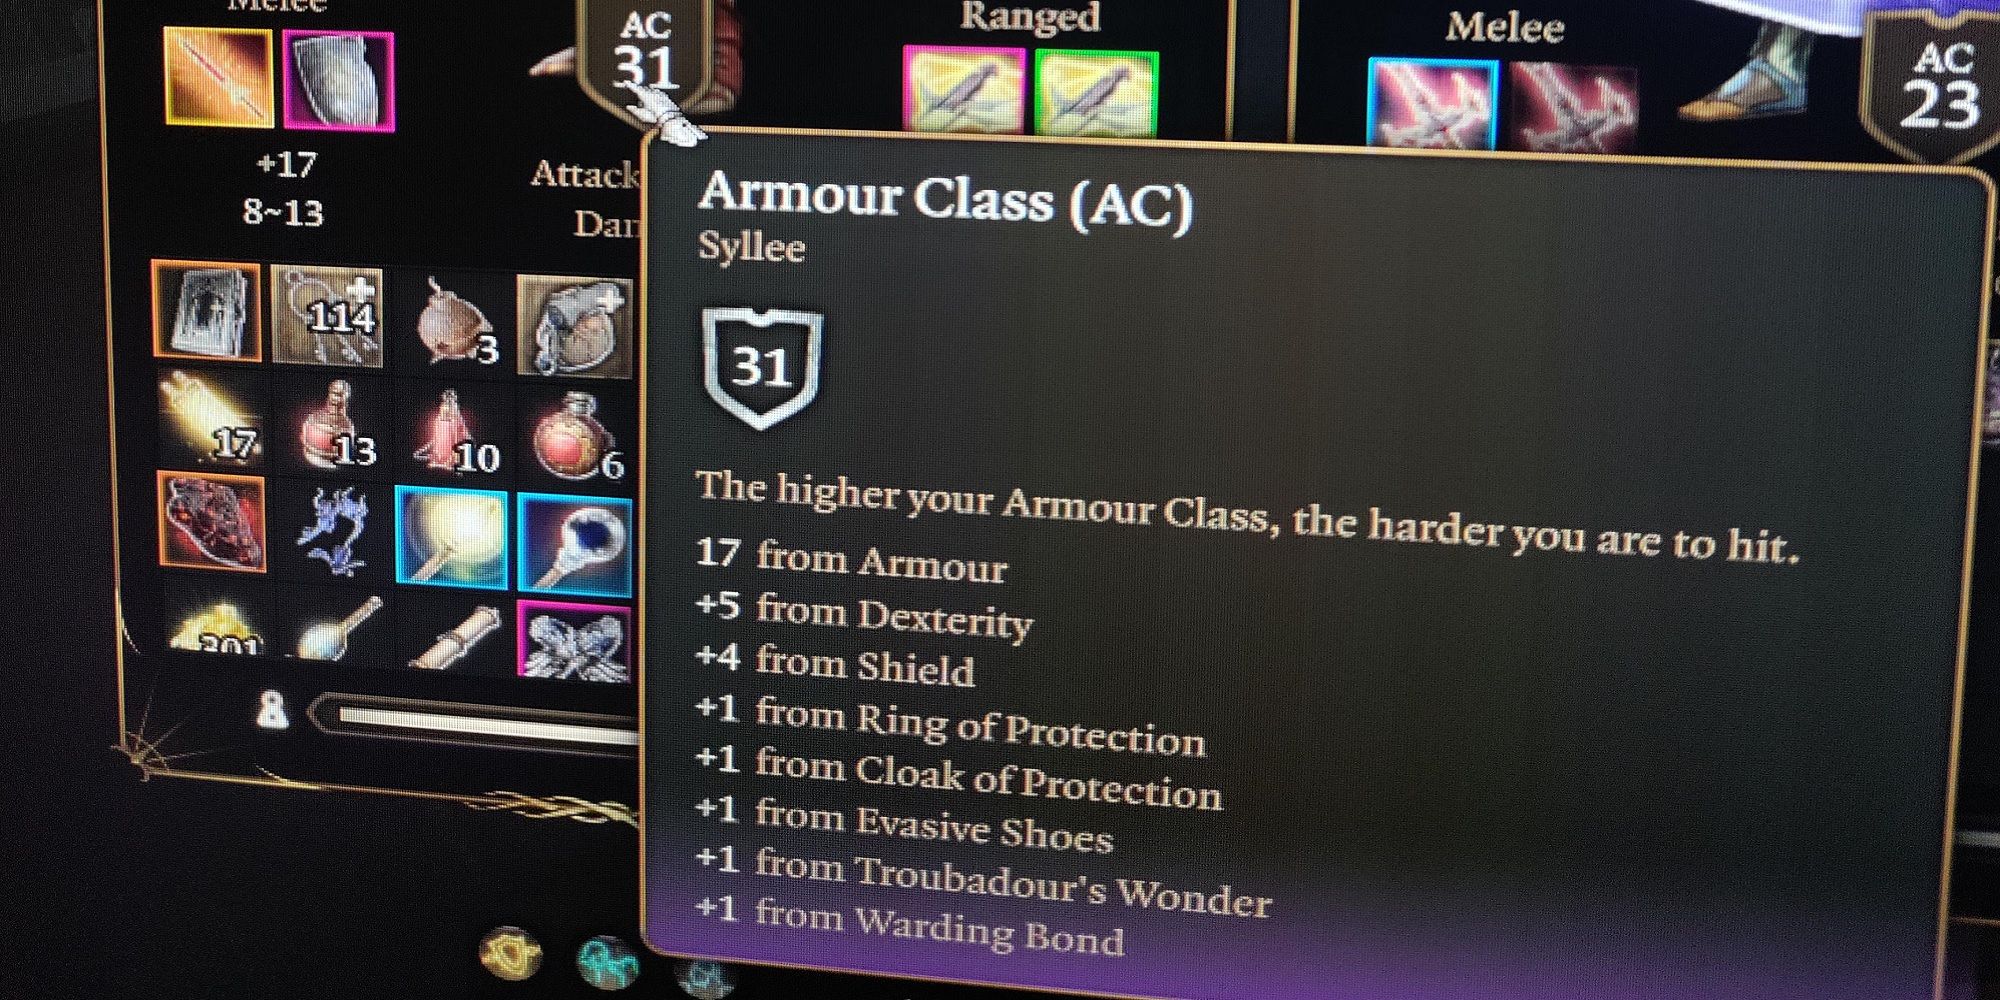 A close-up crop of an inventory screen from the game Baldur's Gate 3. The player's mouse is hovering over their character's Armor Class, where a pop-up box shows a value of 31, and a breakdown of which equipped items are contributing to that number.